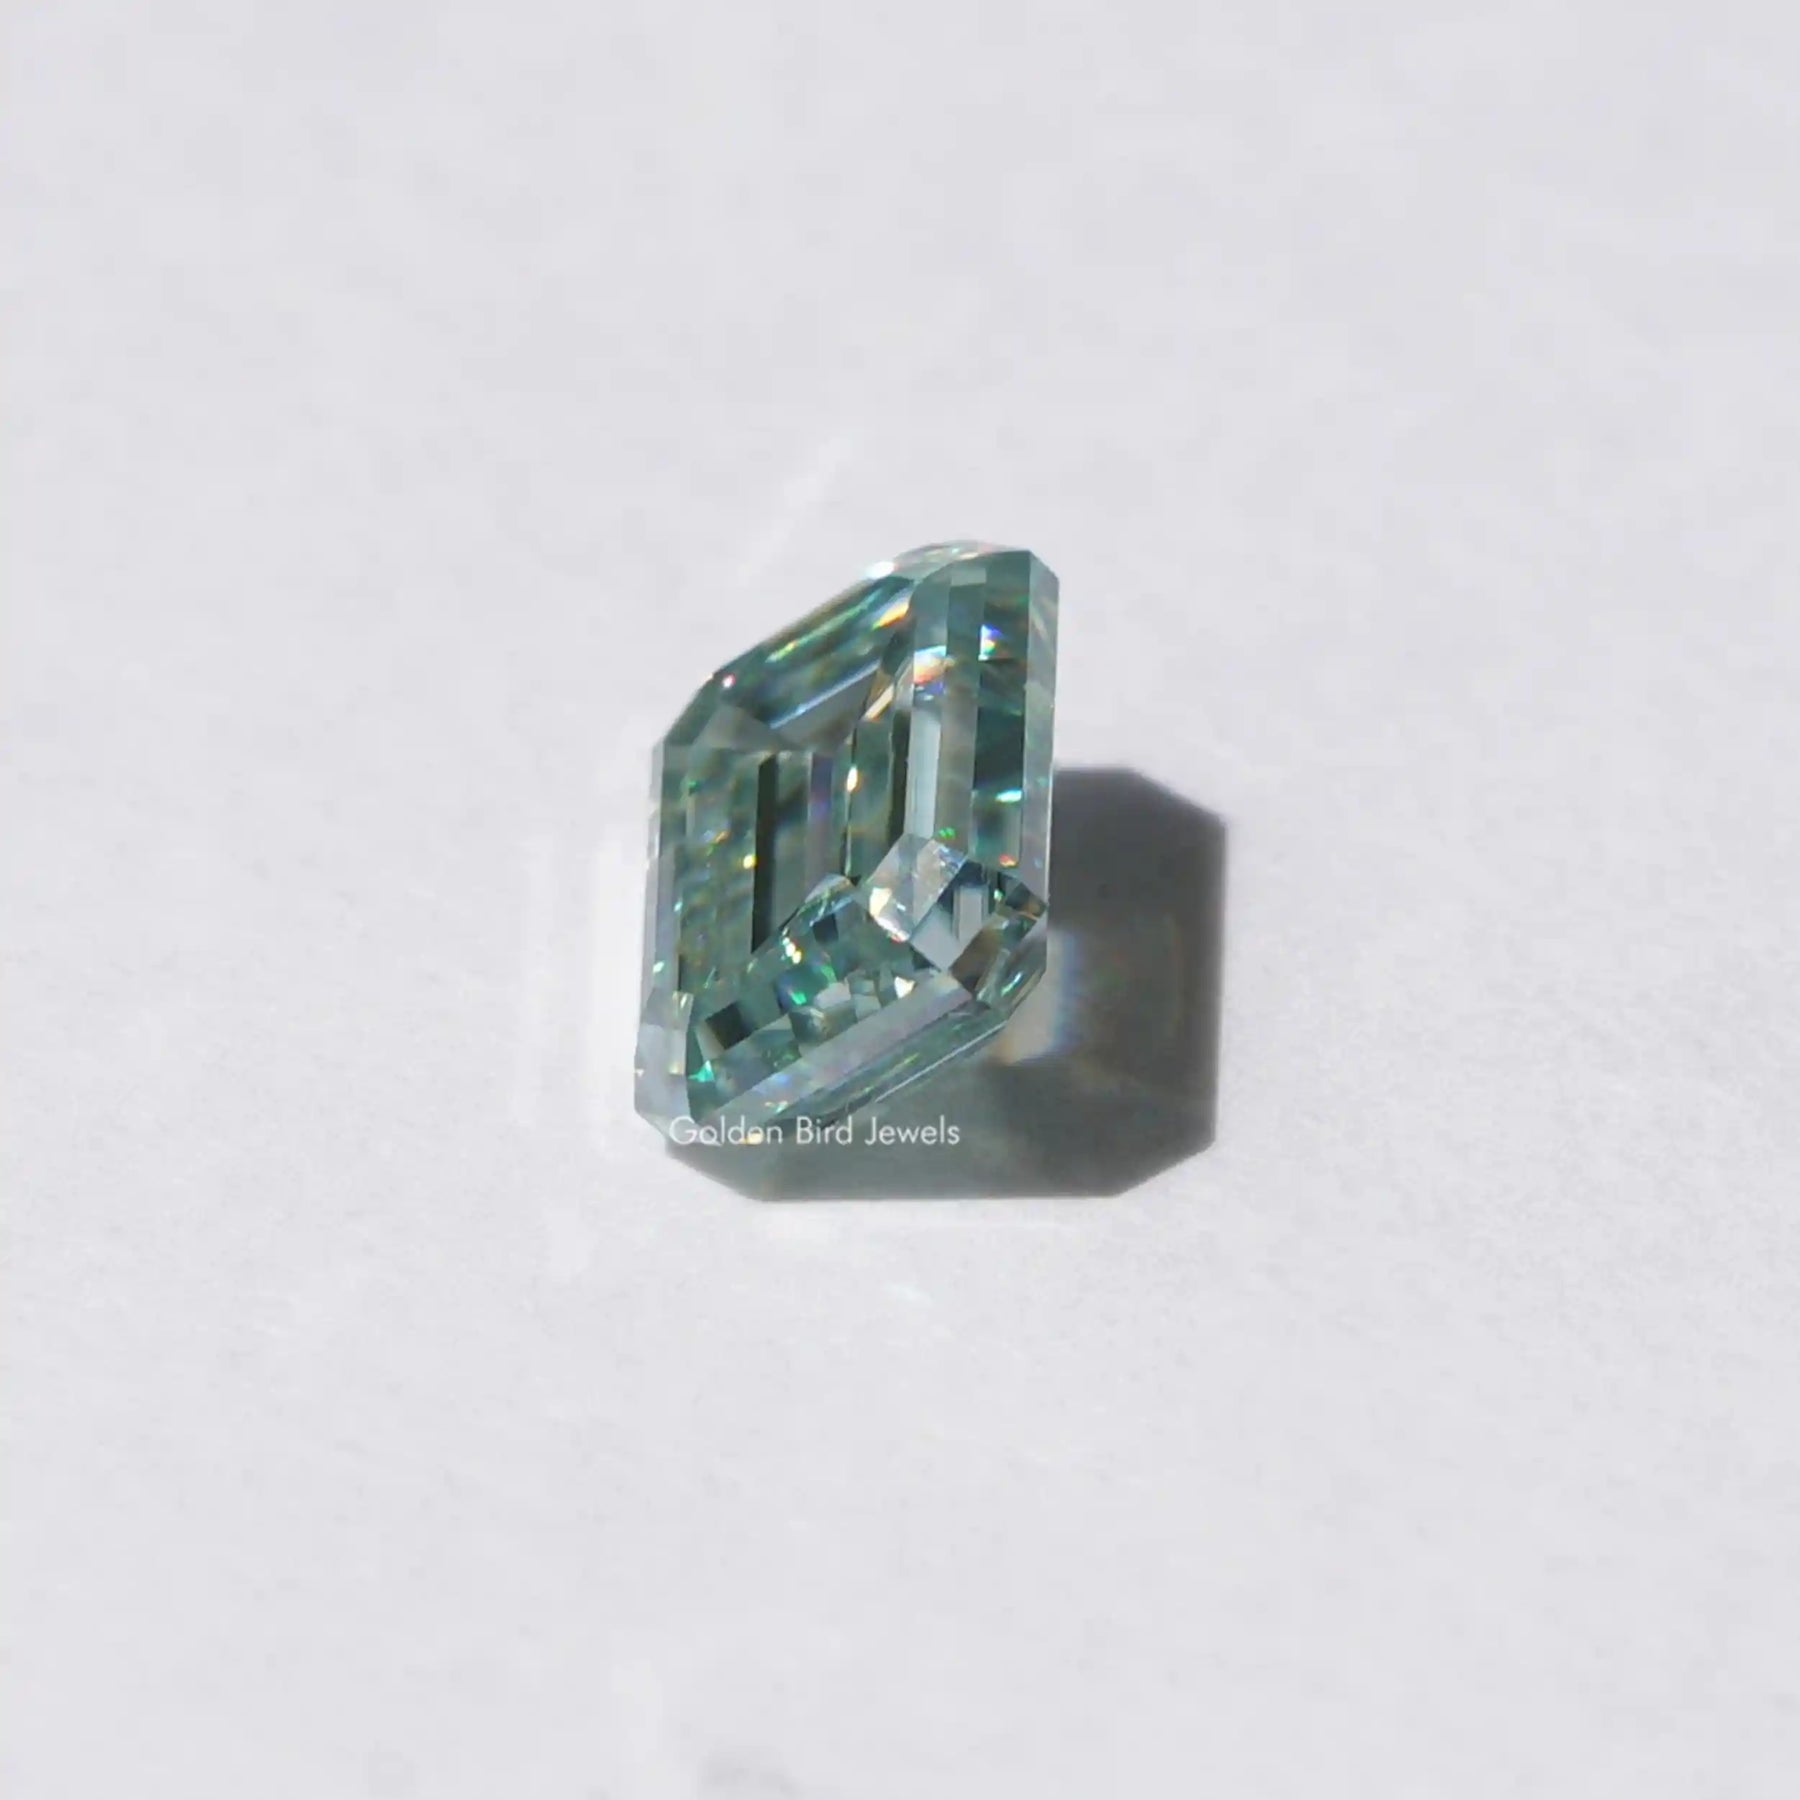 [Side view of emerald cut loose moissanite made of vs clarity]-[Golden Bird Jewels]